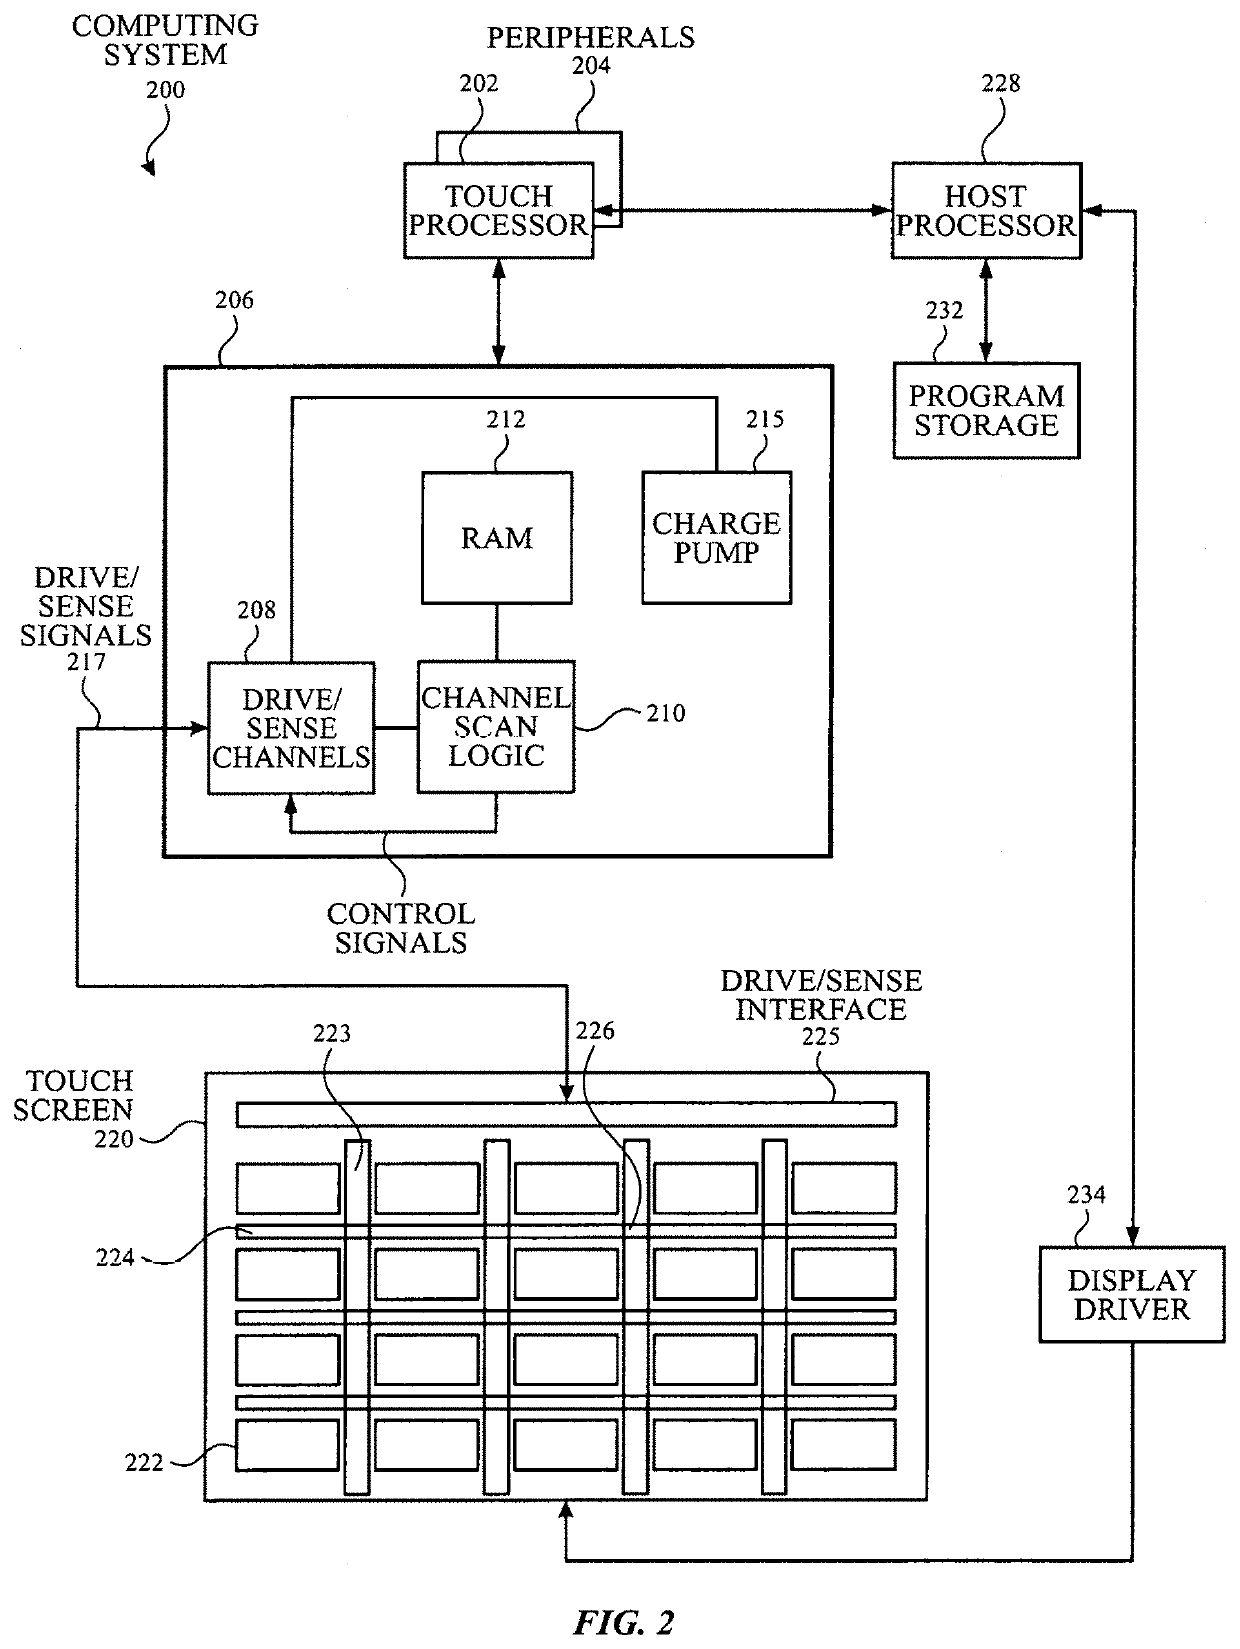 Self-capacitance and mutual capacitance touch-sensor panel architecture